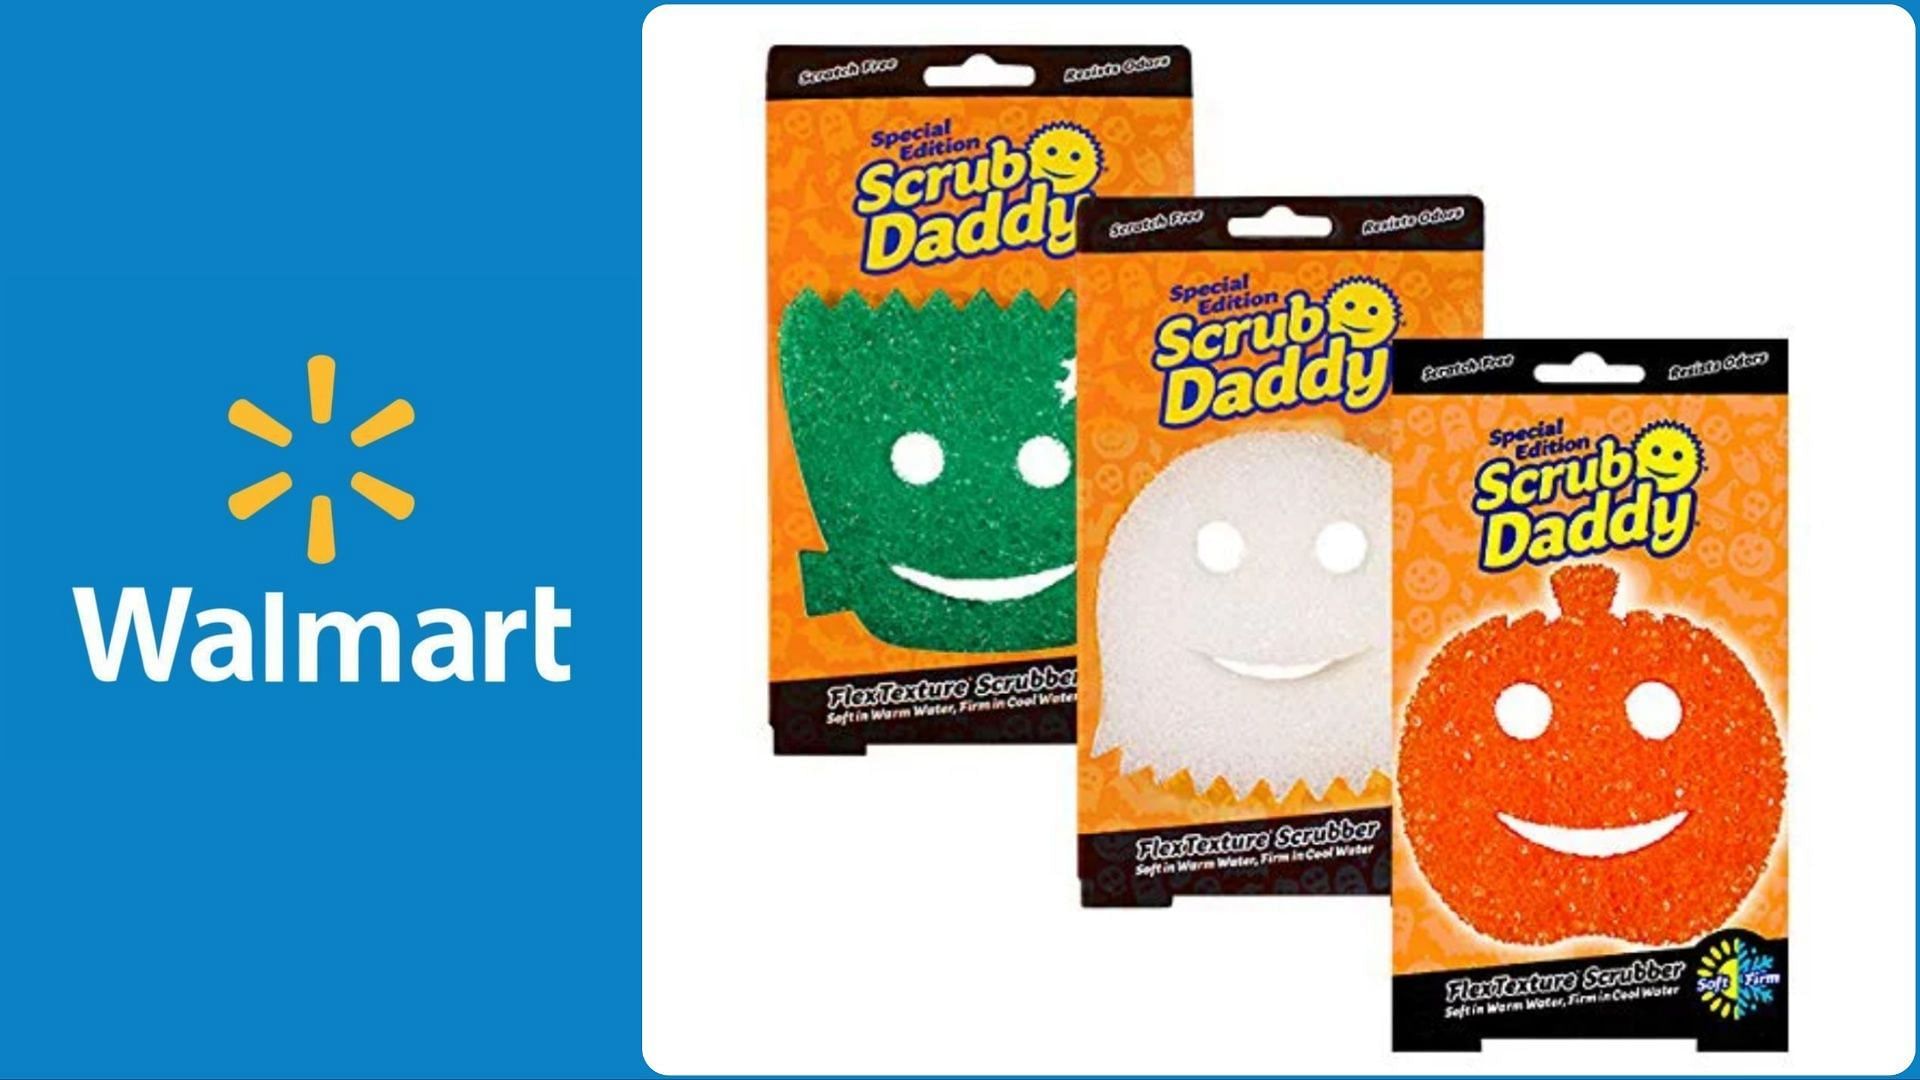 Walmart limited-edition Scrub Daddy Sponges: price, colors, and